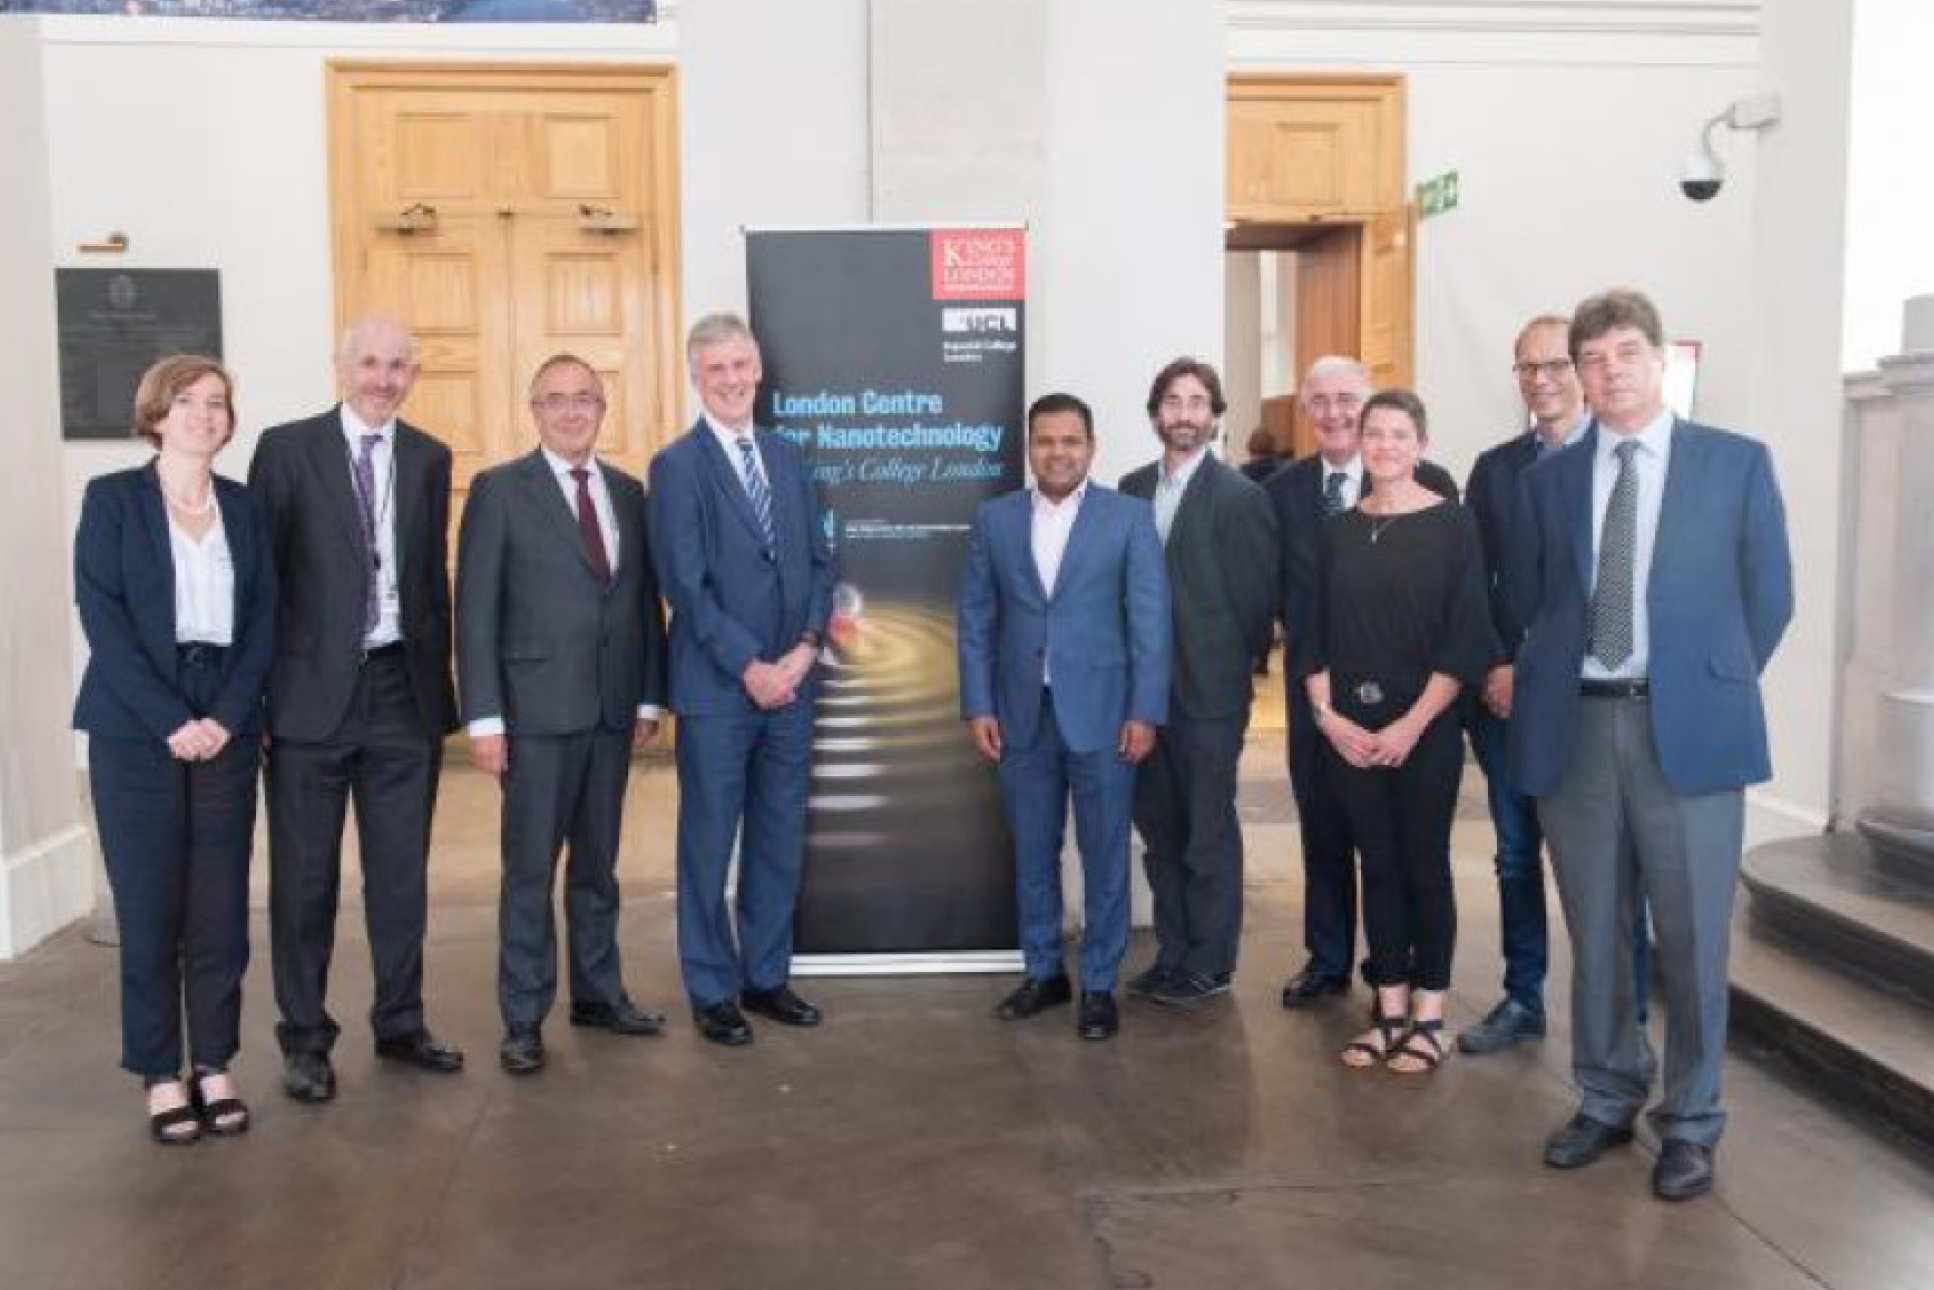 VIPs, directors and some speakers at the KCL accession launch event